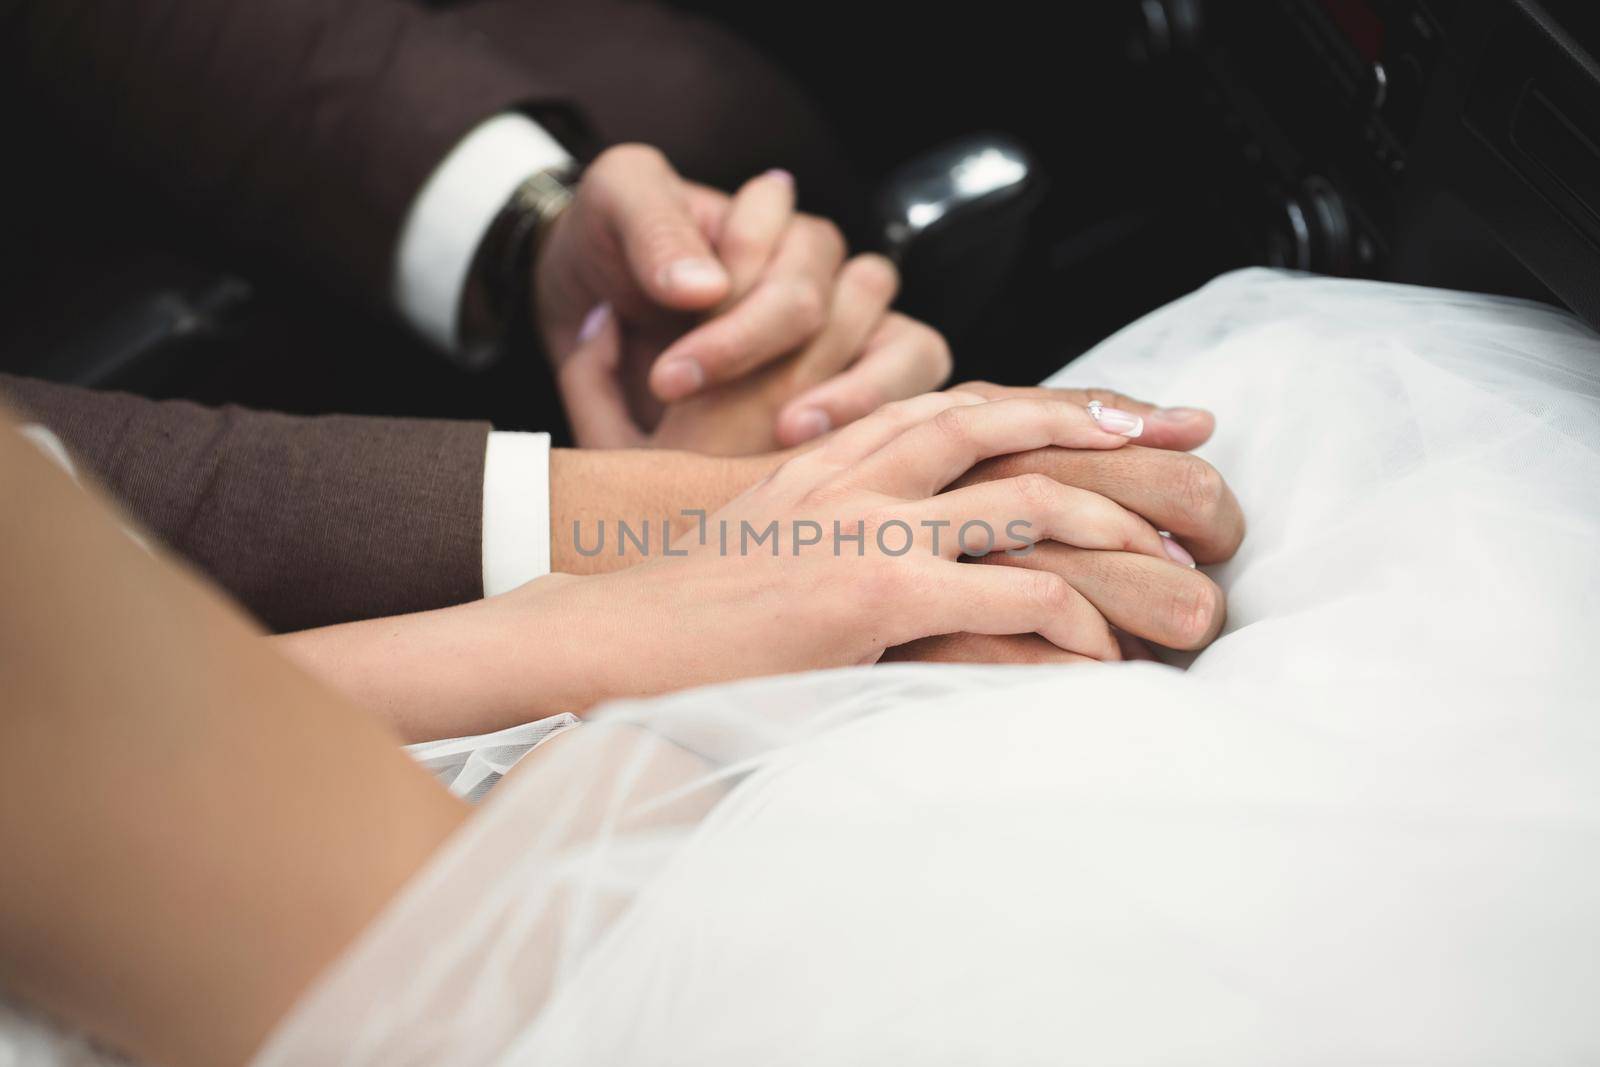 The bride and groom hold hands on the wedding day by StudioPeace